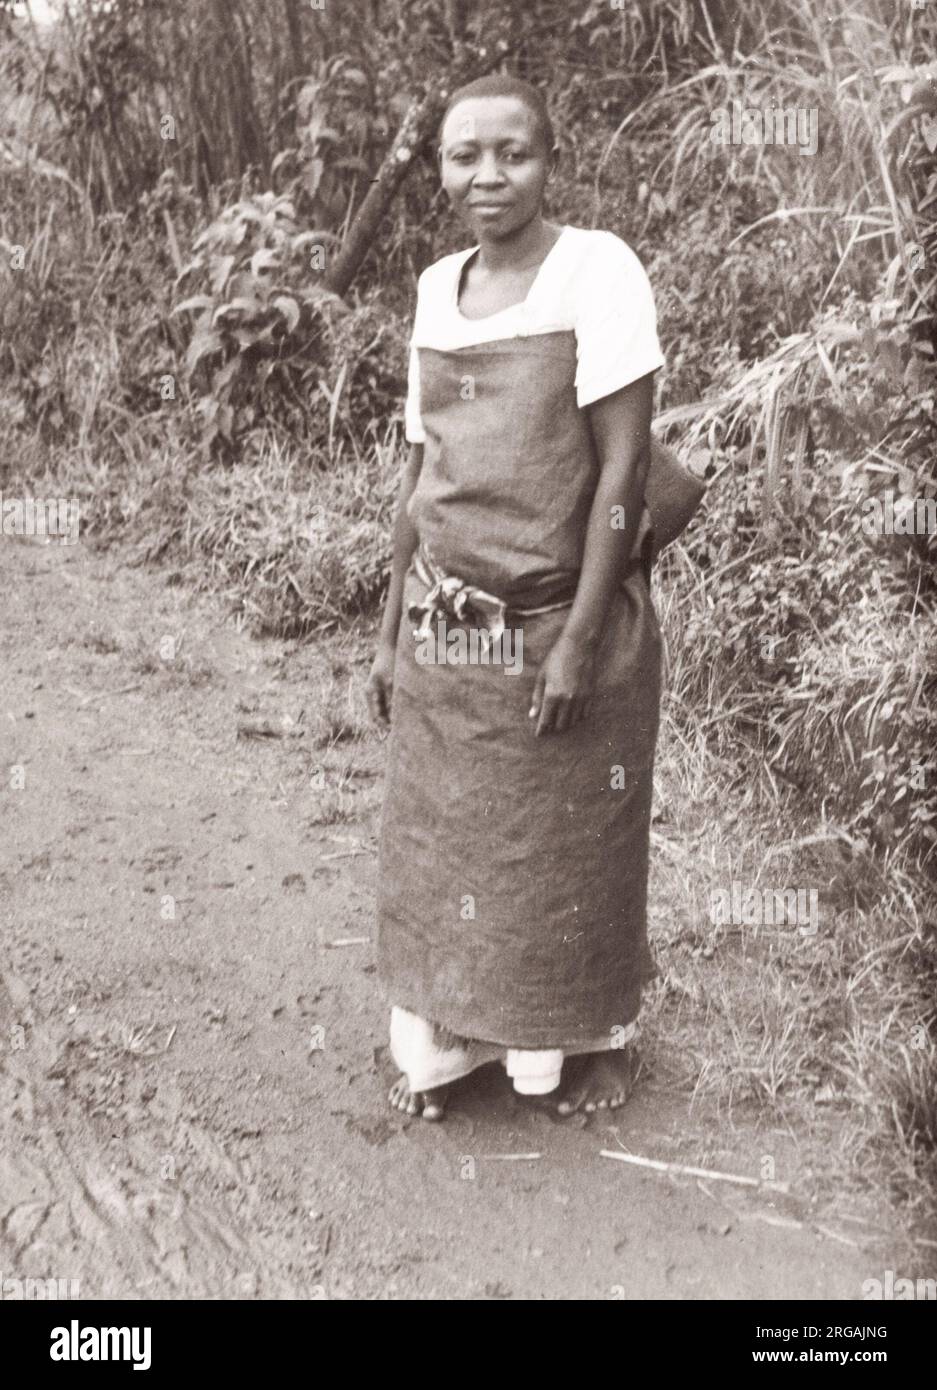 1940s East Africa - Uganda - Baganda woman in a traditional bark cloth or barkcloth dress Photograph by a British army recruitment officer stationed in East Africa and the Middle East during World War II Stock Photo